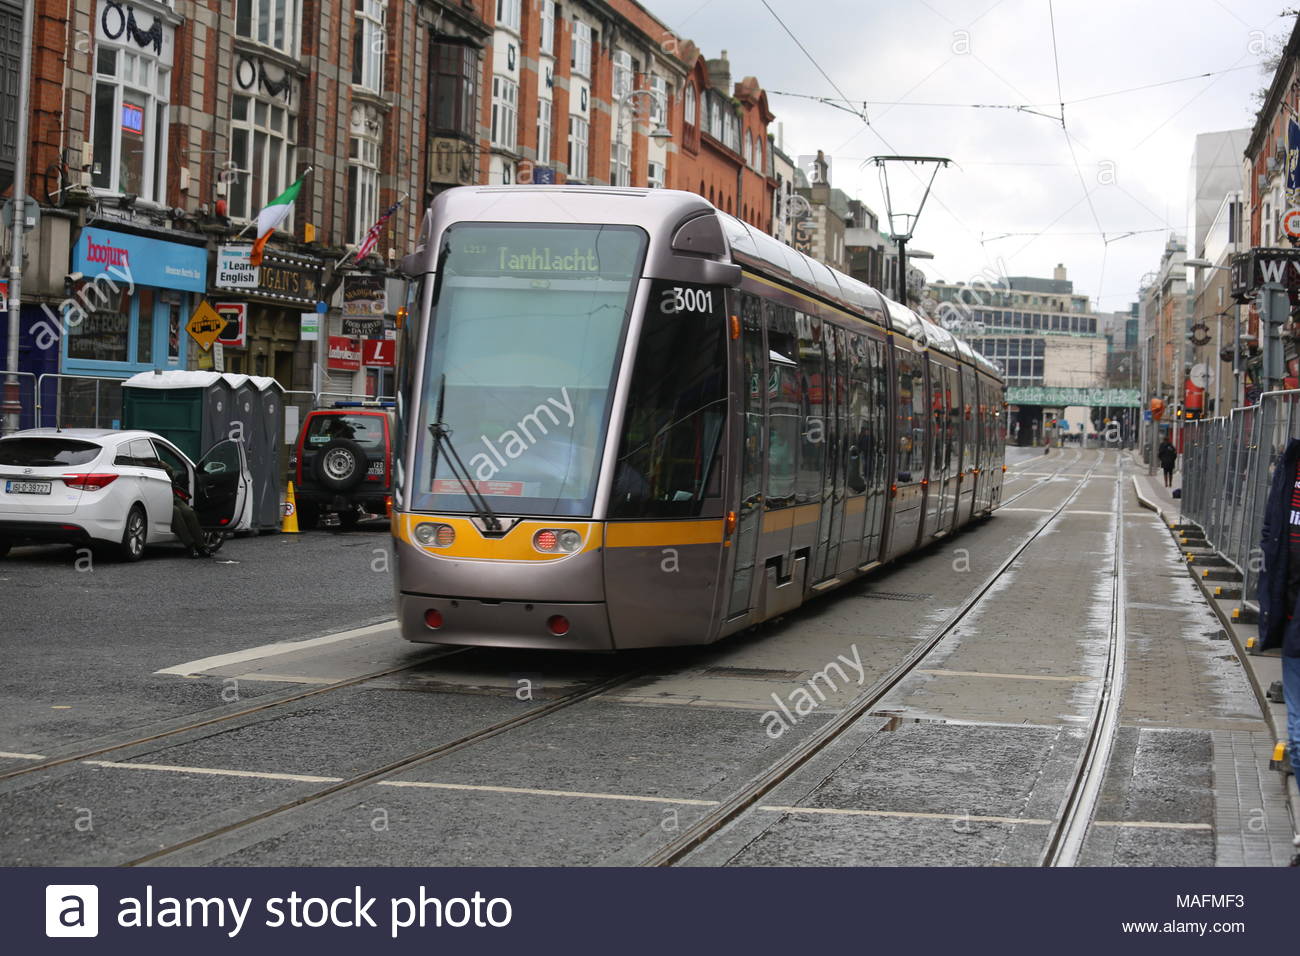 A Luas tram in inner Dublin, Ireland at a time when the Luas system has been rapidly developed and is being used by many commuters in the capital city Stock Photo